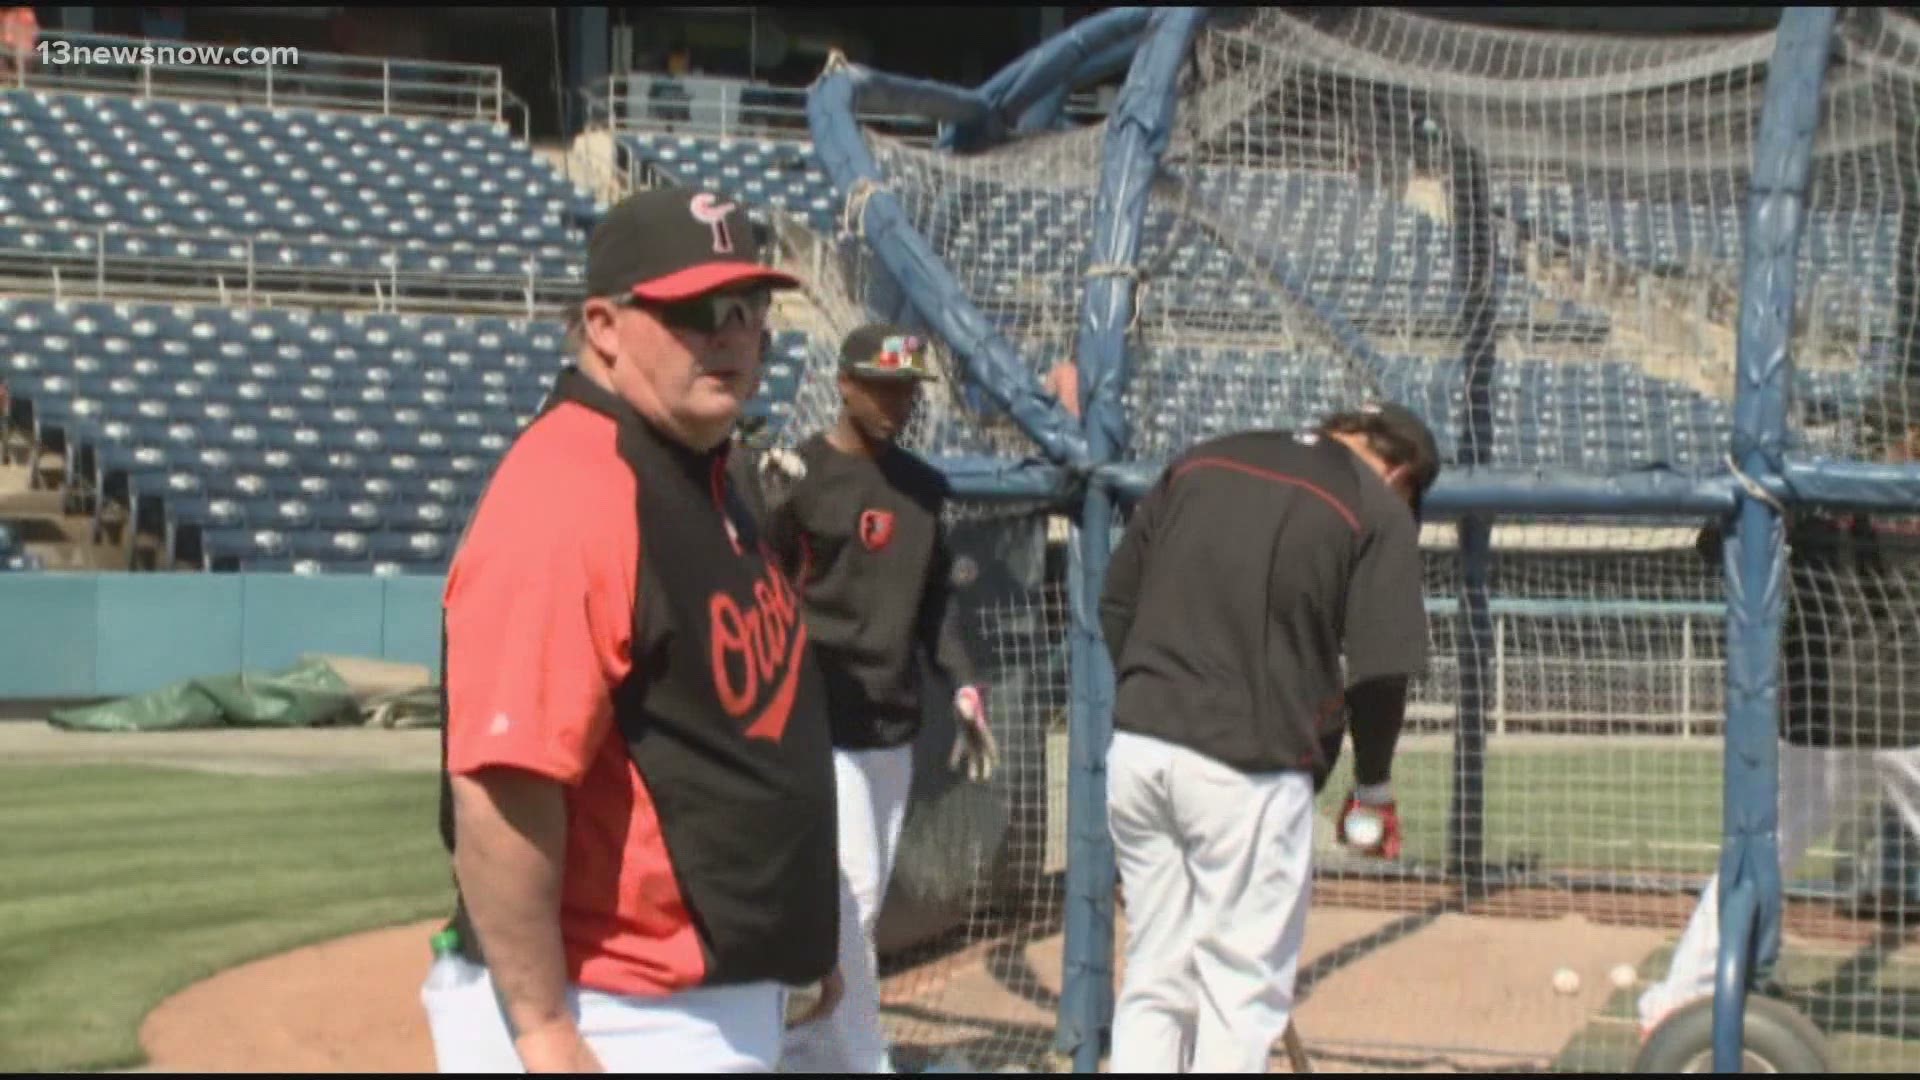 Johnson was the winningest manager in Tides history and was with the team for 7 years.